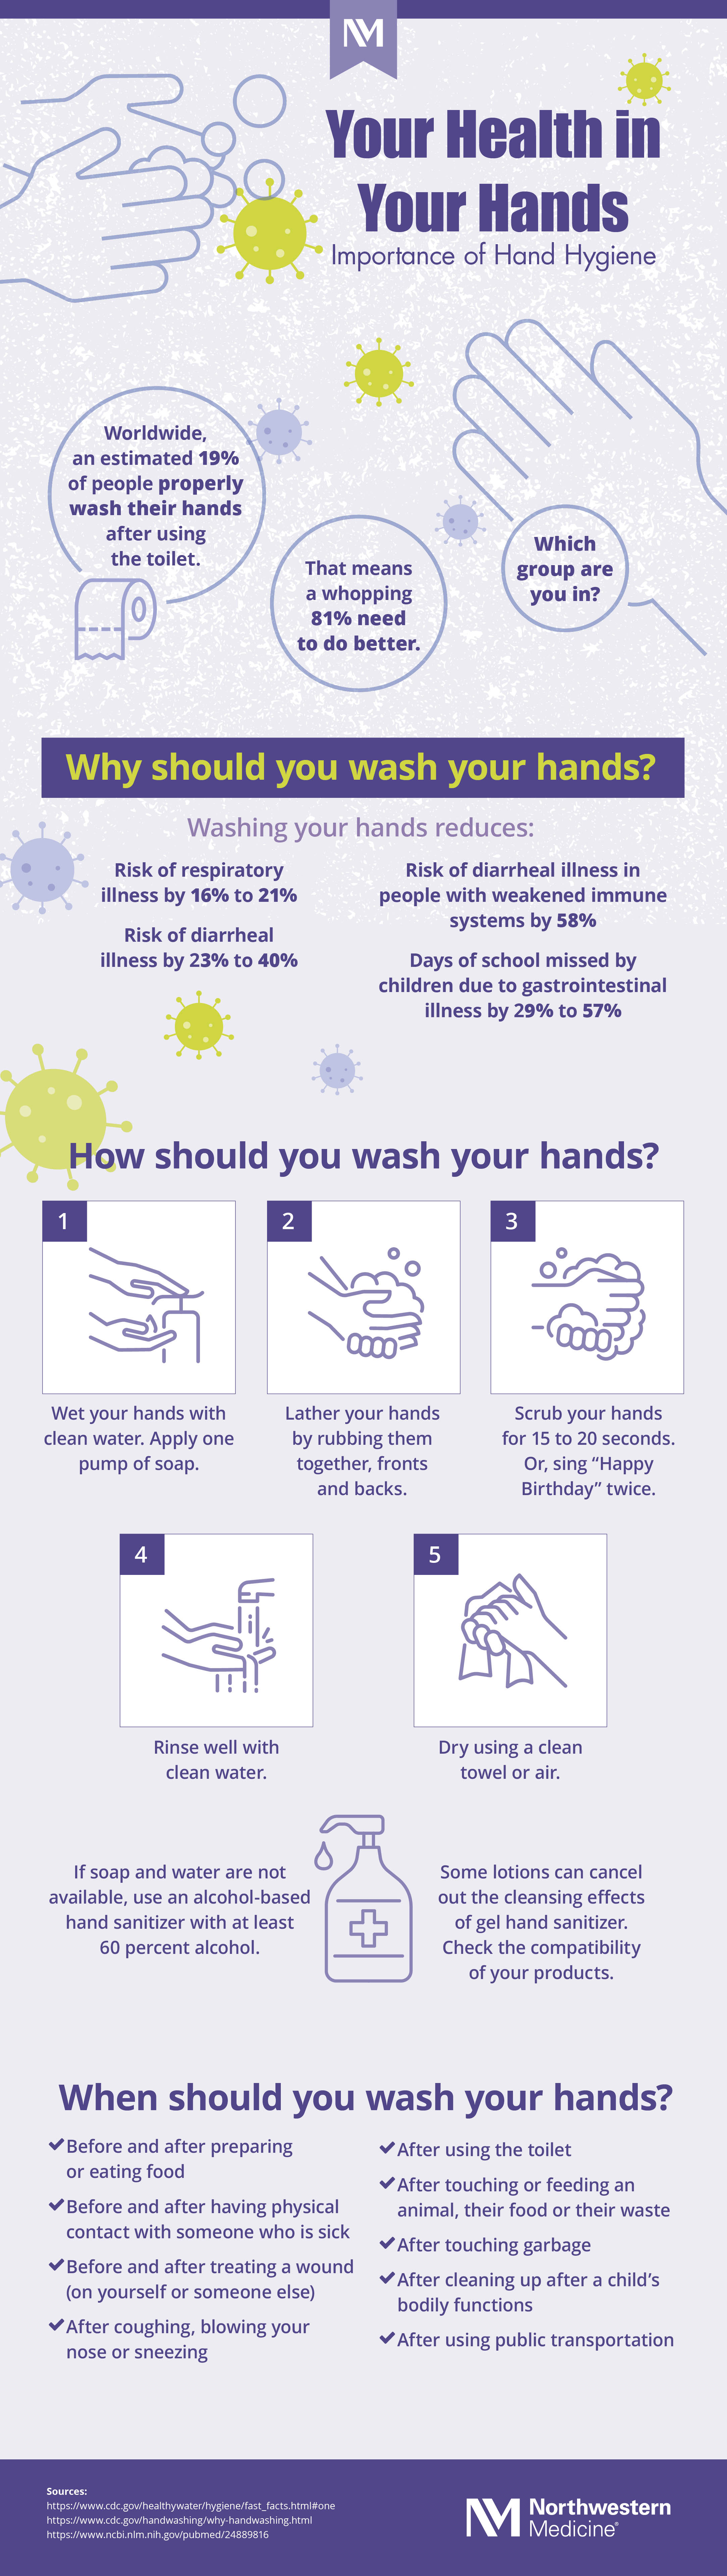 Tips for Handwashing When Running Water is Not Accessible